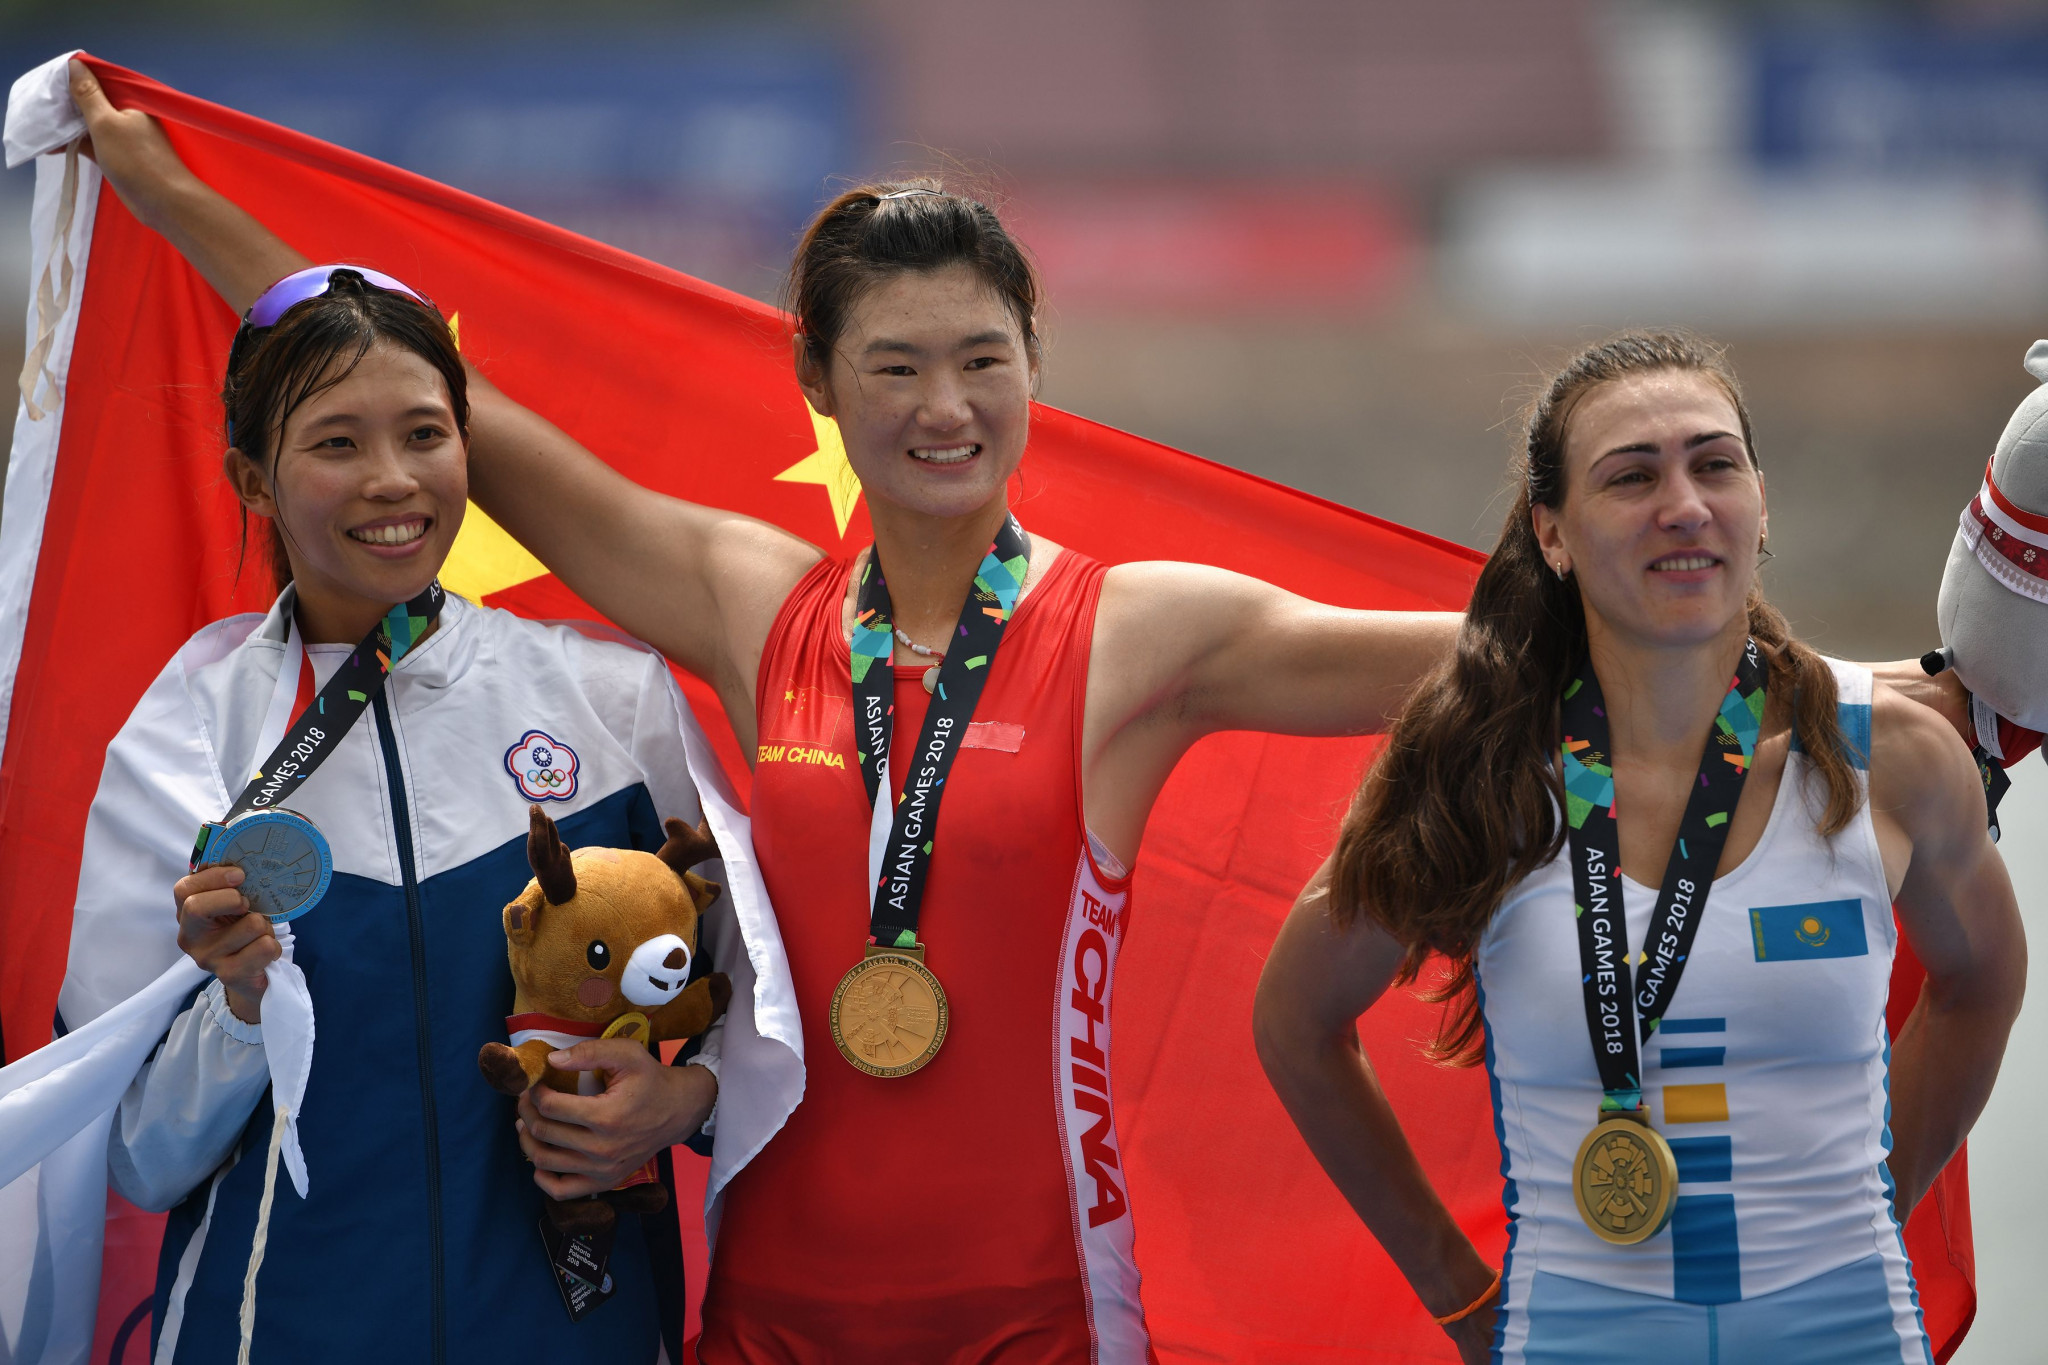 China claimed six of the eight golds on offer as the first rowing medals of the 2018 Asian Games were awarded on day five of competition in Jakarta and Palembang ©Getty Images